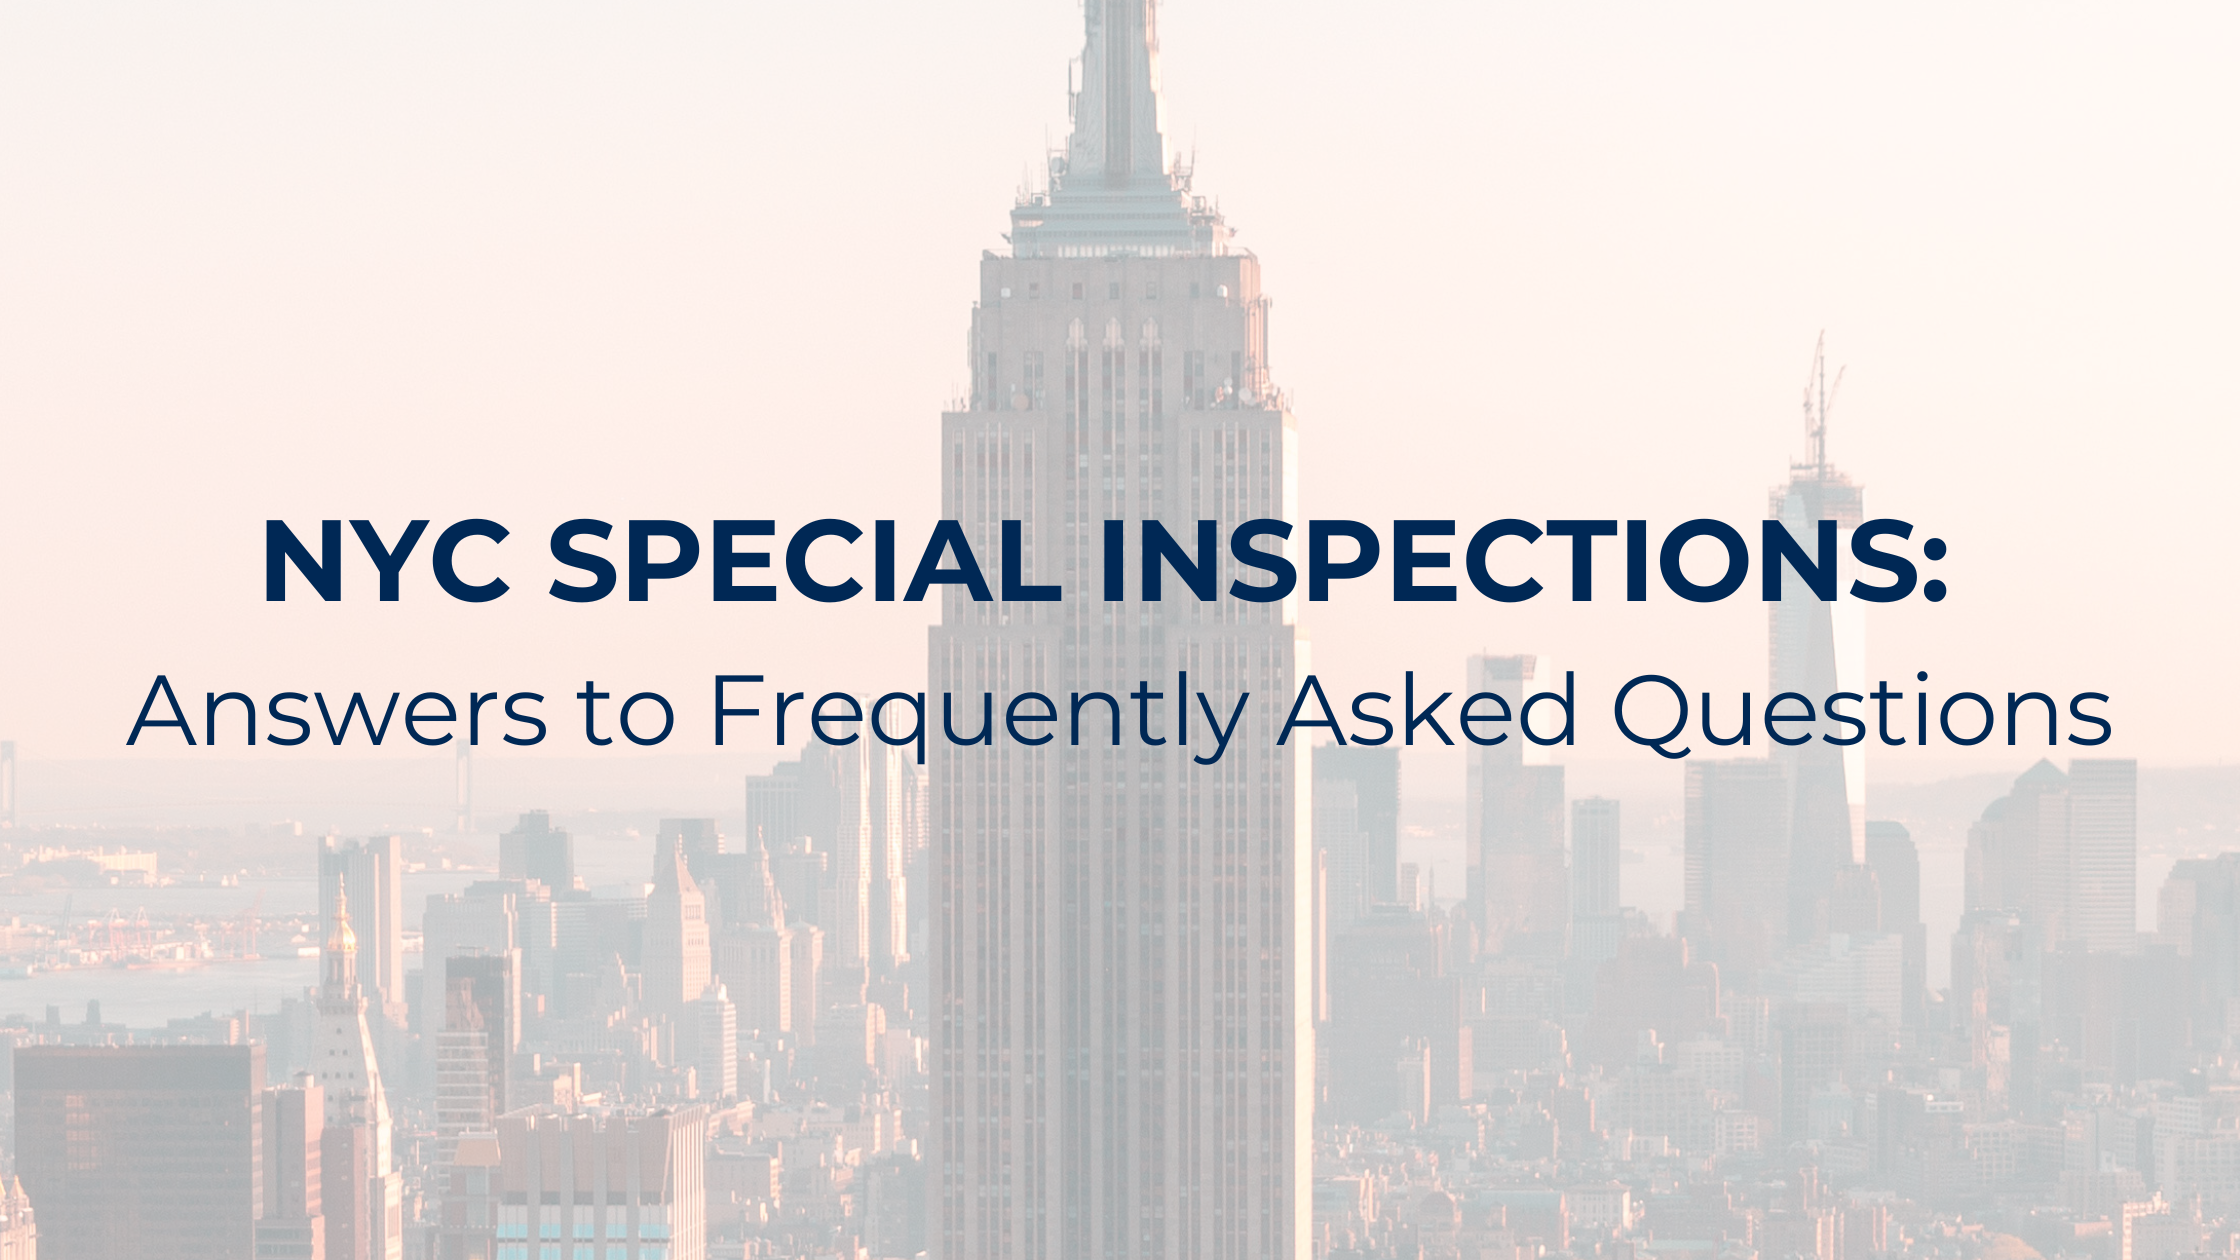 NYC Special Inspections: Answers to Frequently Asked Questions